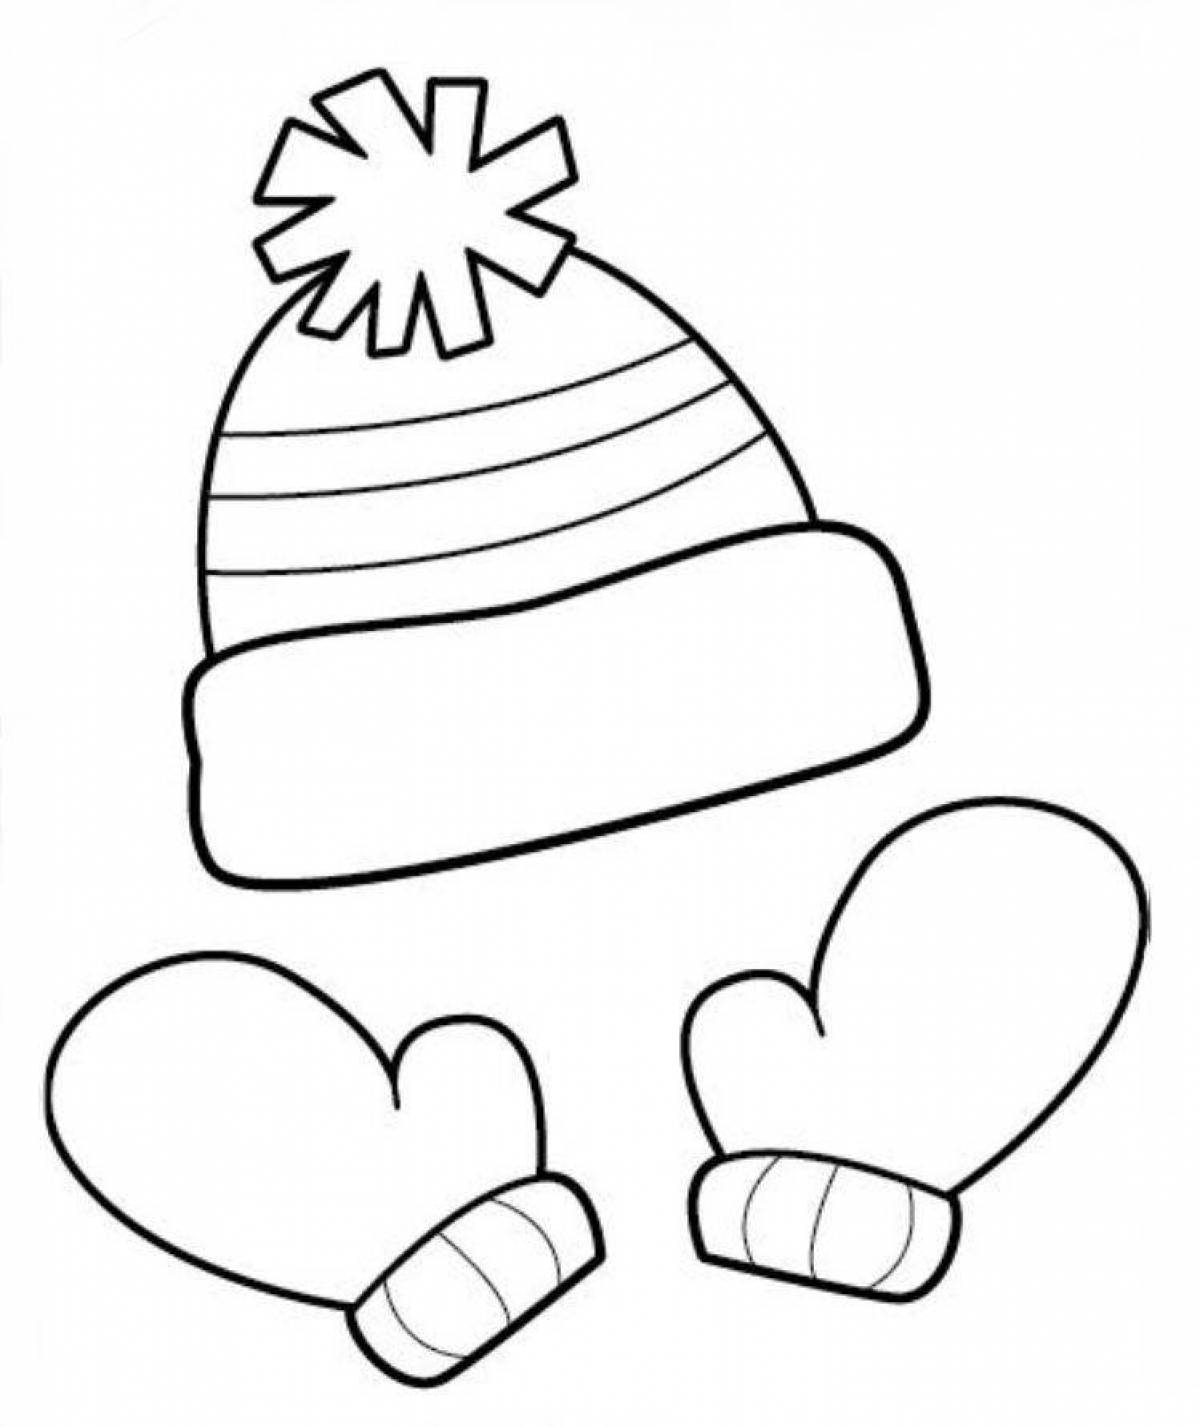 Adorable hat coloring book for 2-3 year olds